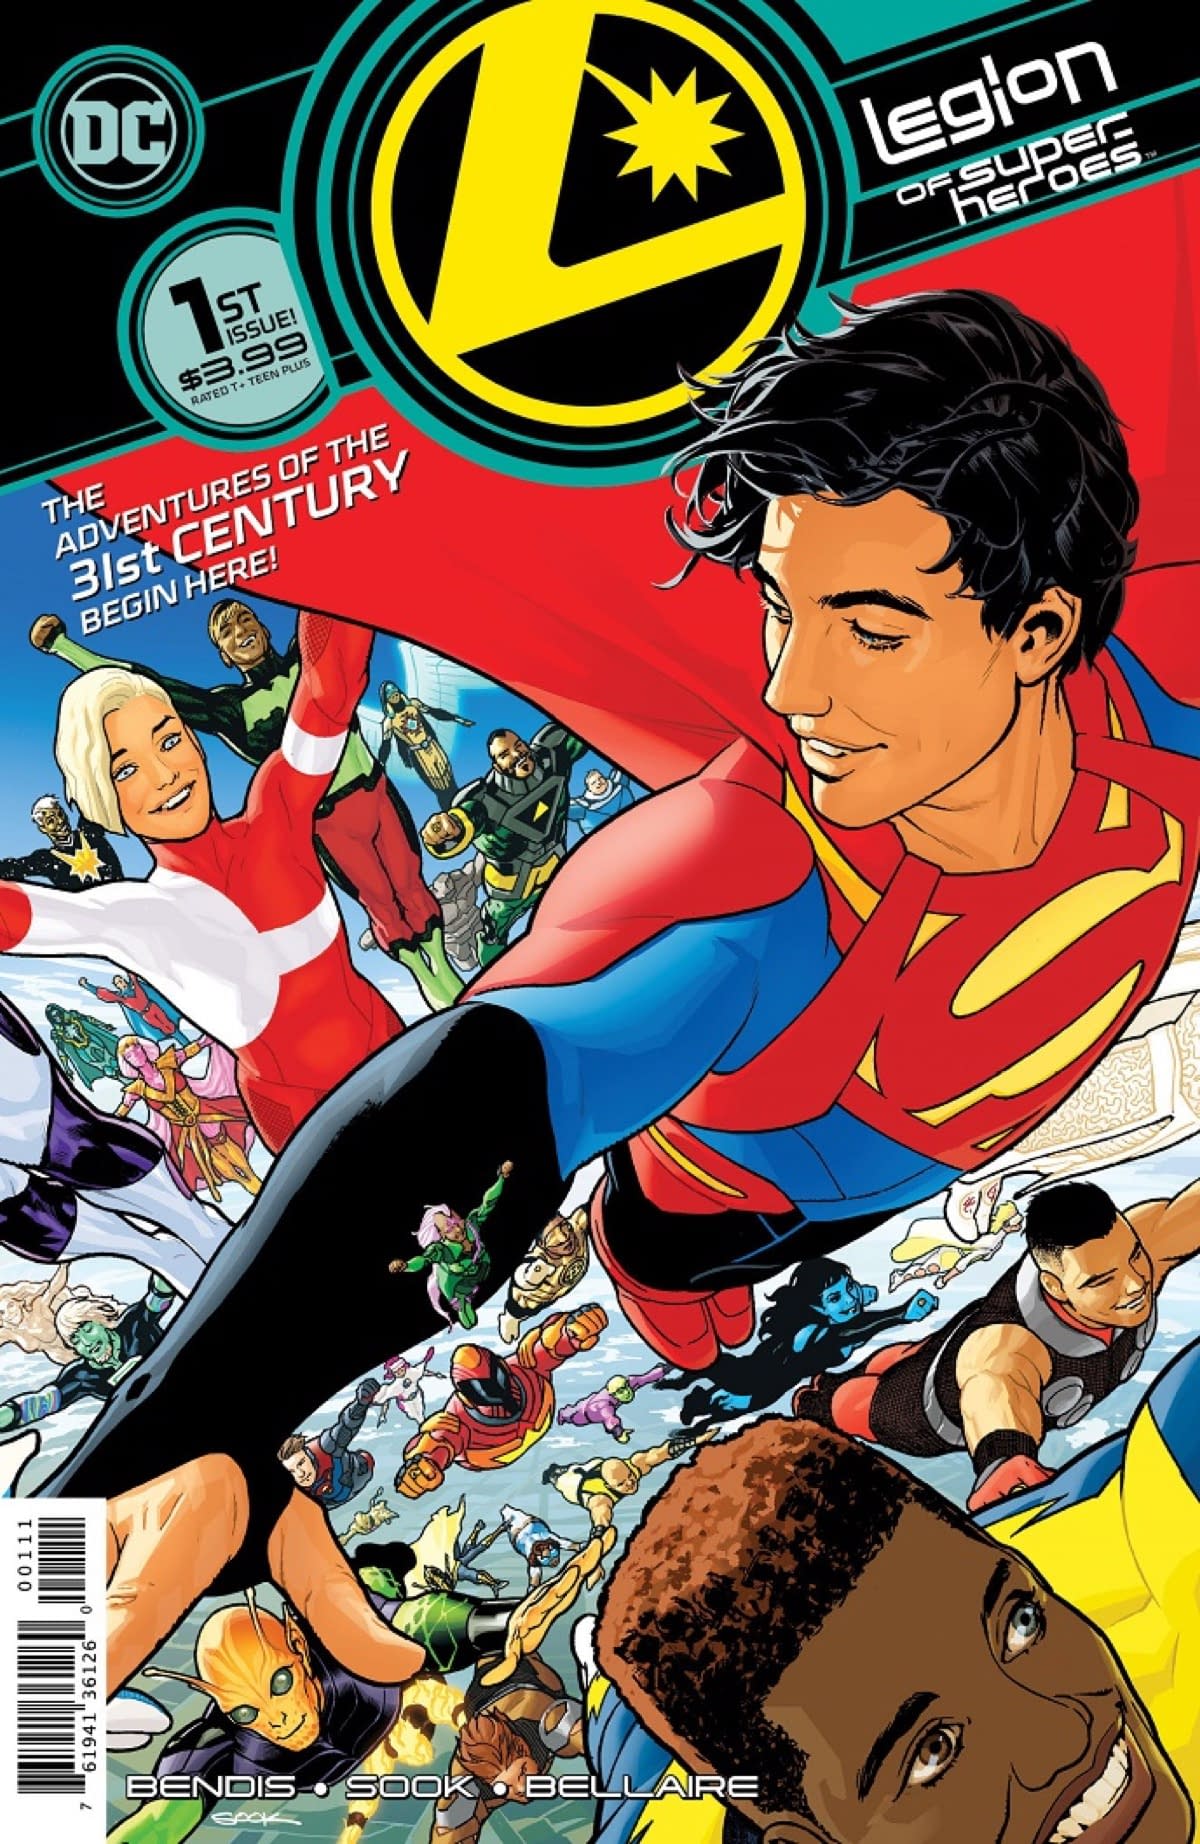 DC Shows Off Art from Bendis and Sook's Legion of Super-Heroes #1